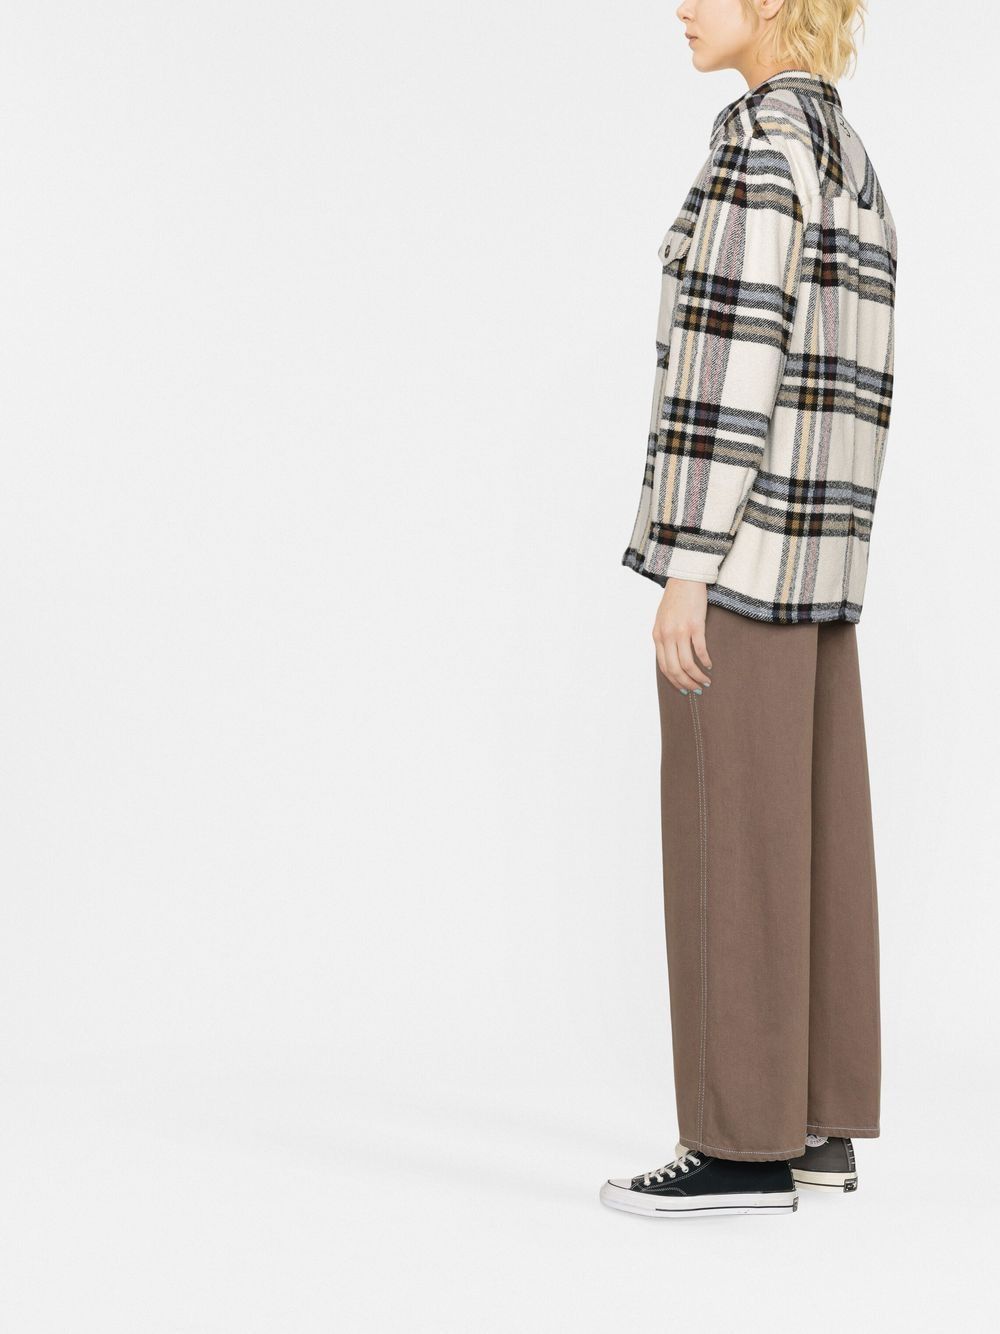 ISABEL MARANT ETOILE Luxurious Wool Blend Coat for Women - Perfect for Fall and Winter Seasons!